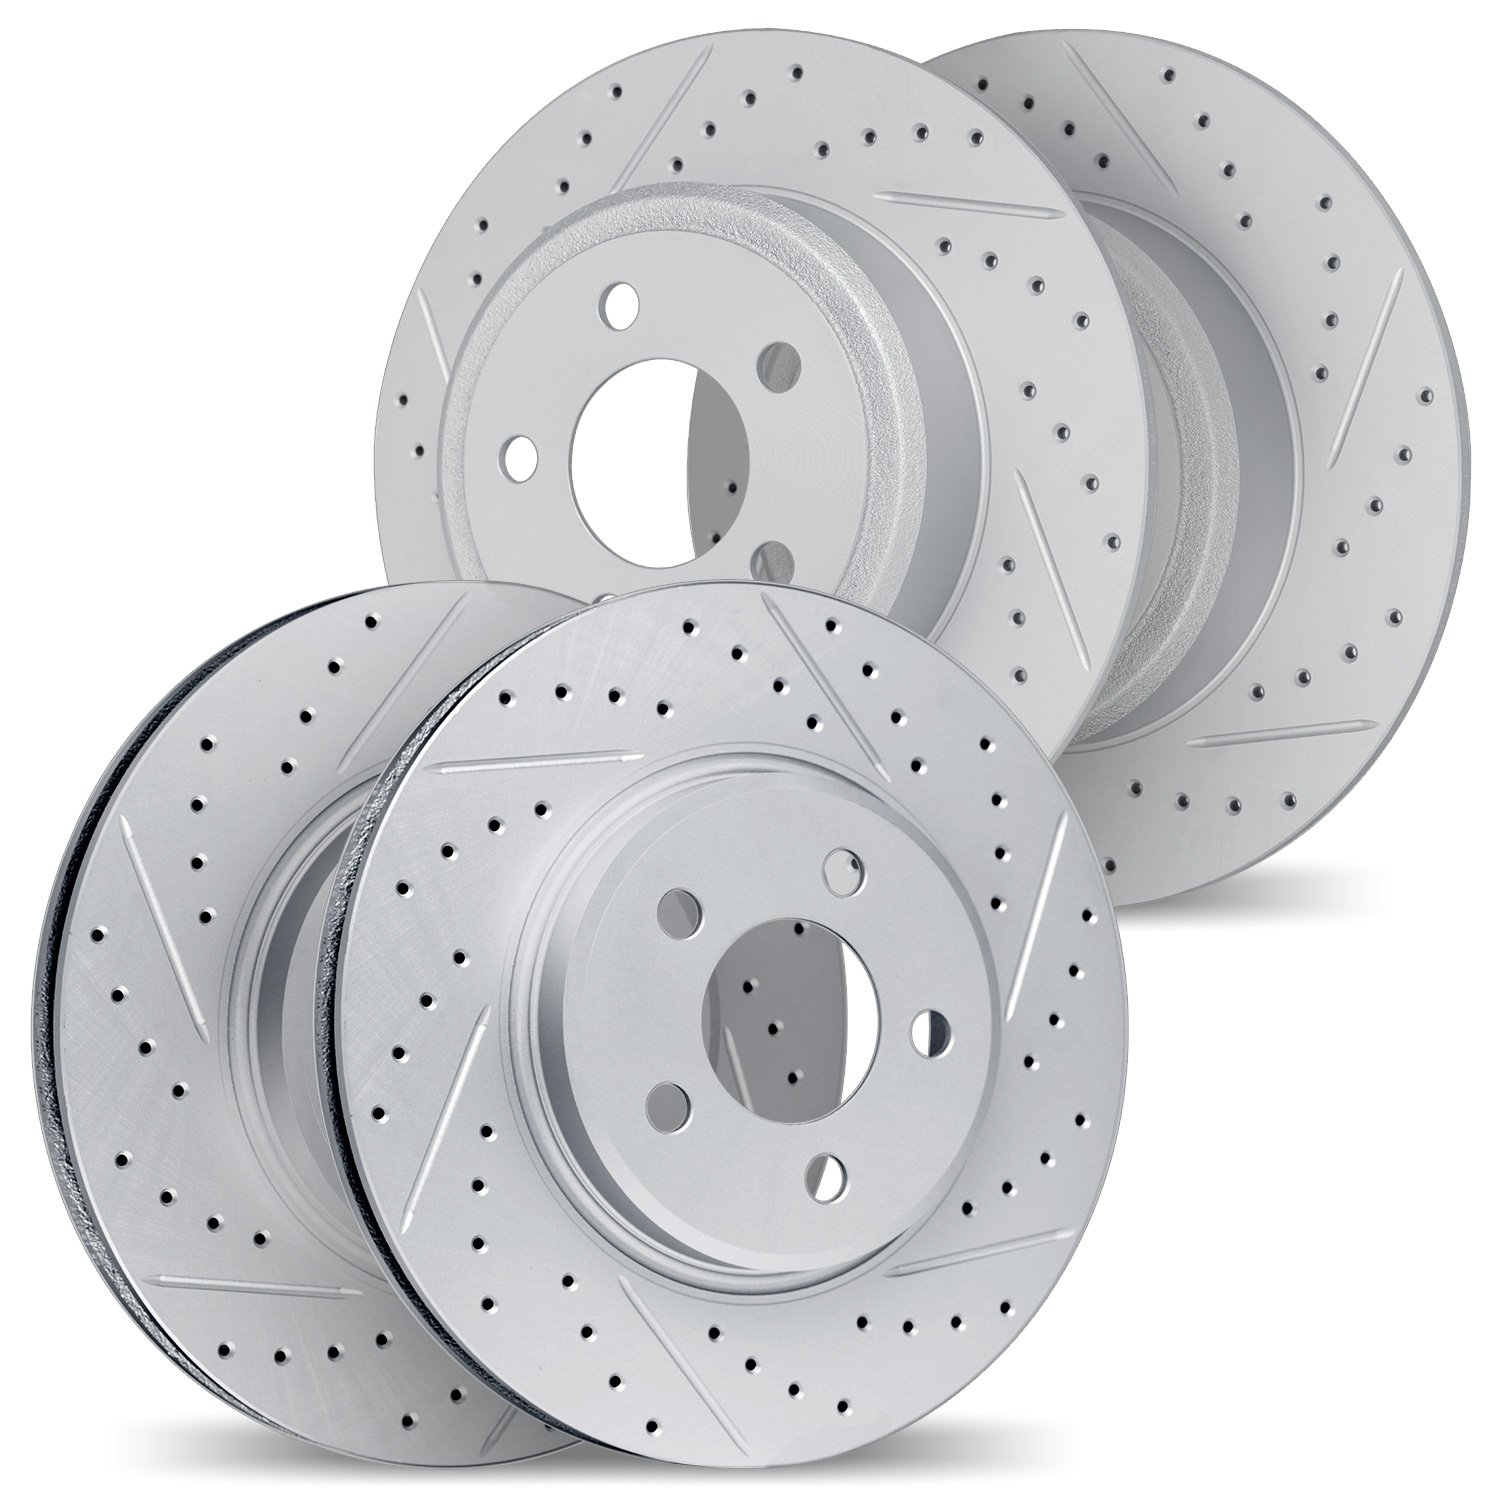 2004-63005 Geoperformance Drilled/Slotted Brake Rotors, 1979-1985 Mercedes-Benz, Position: Front and Rear